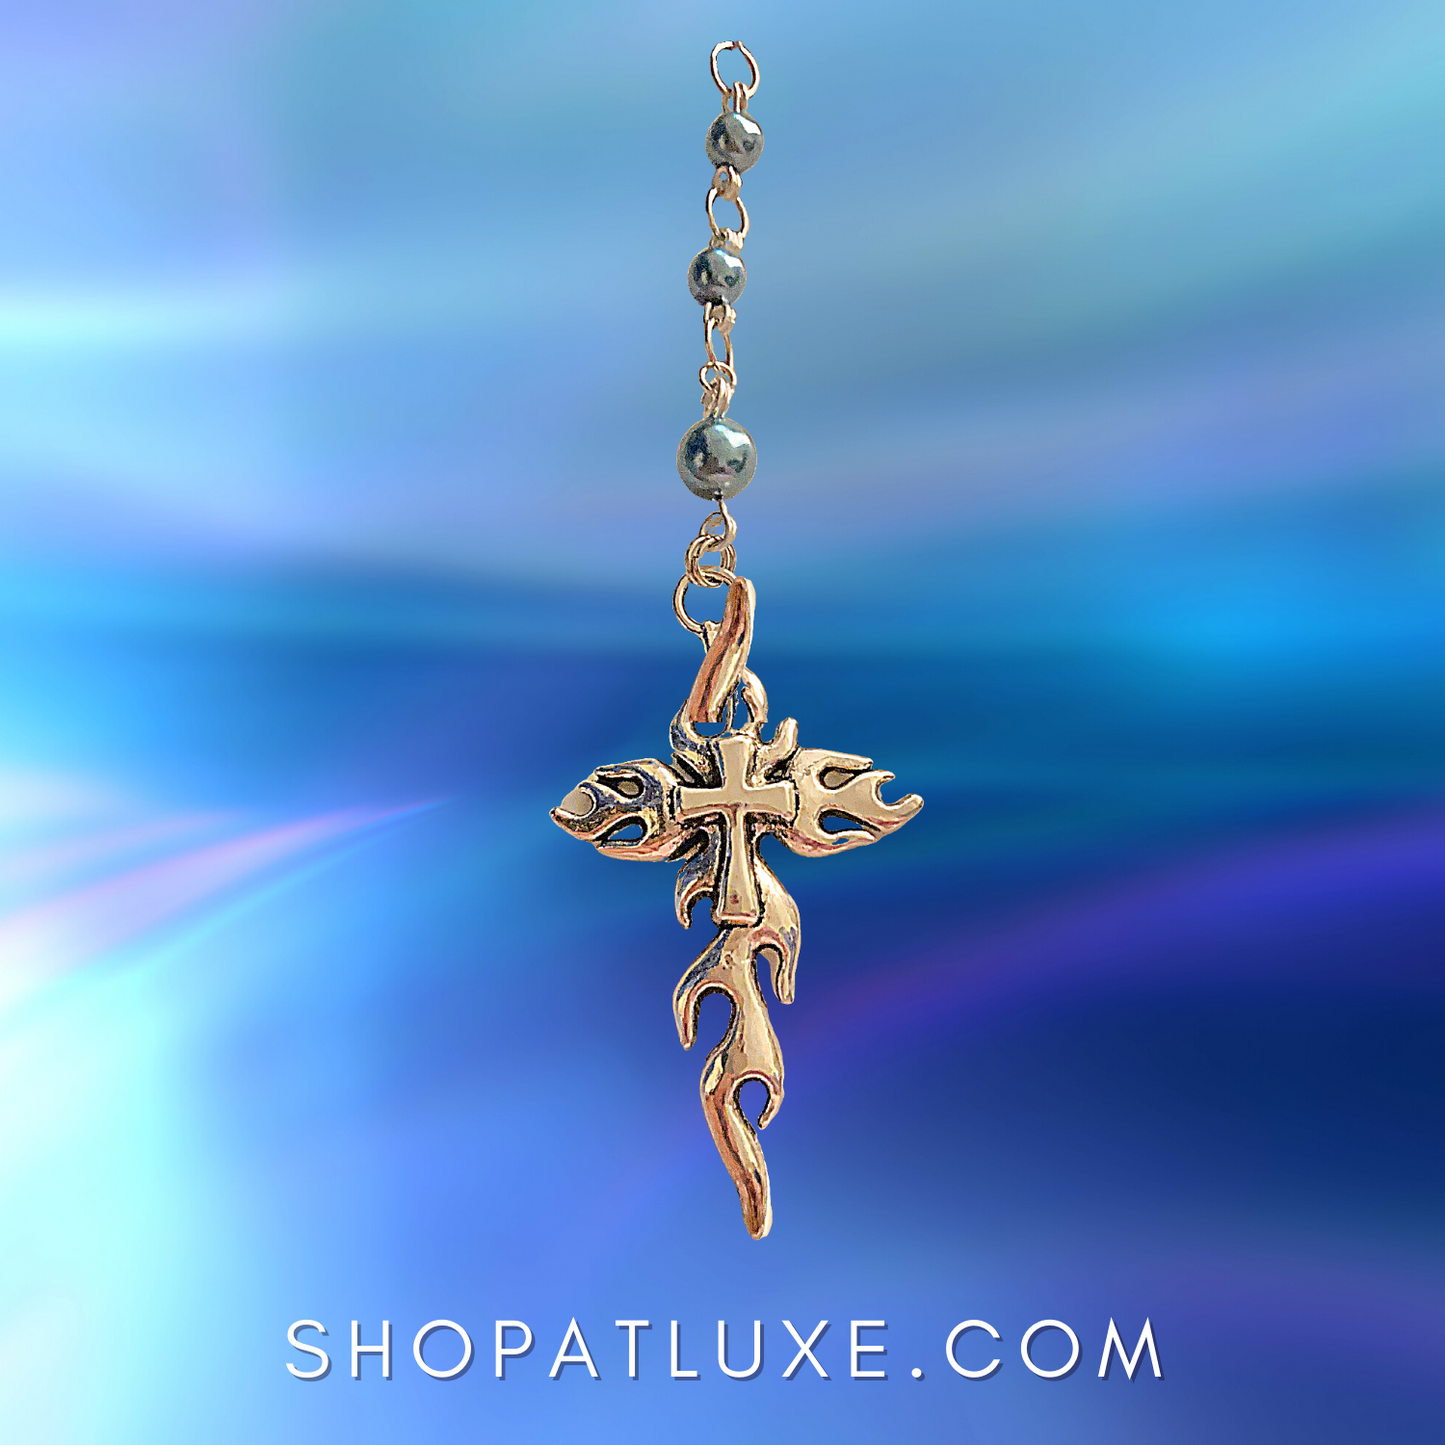 Sapphire Blue Beaded Rosary With Flaming Cross Pendant